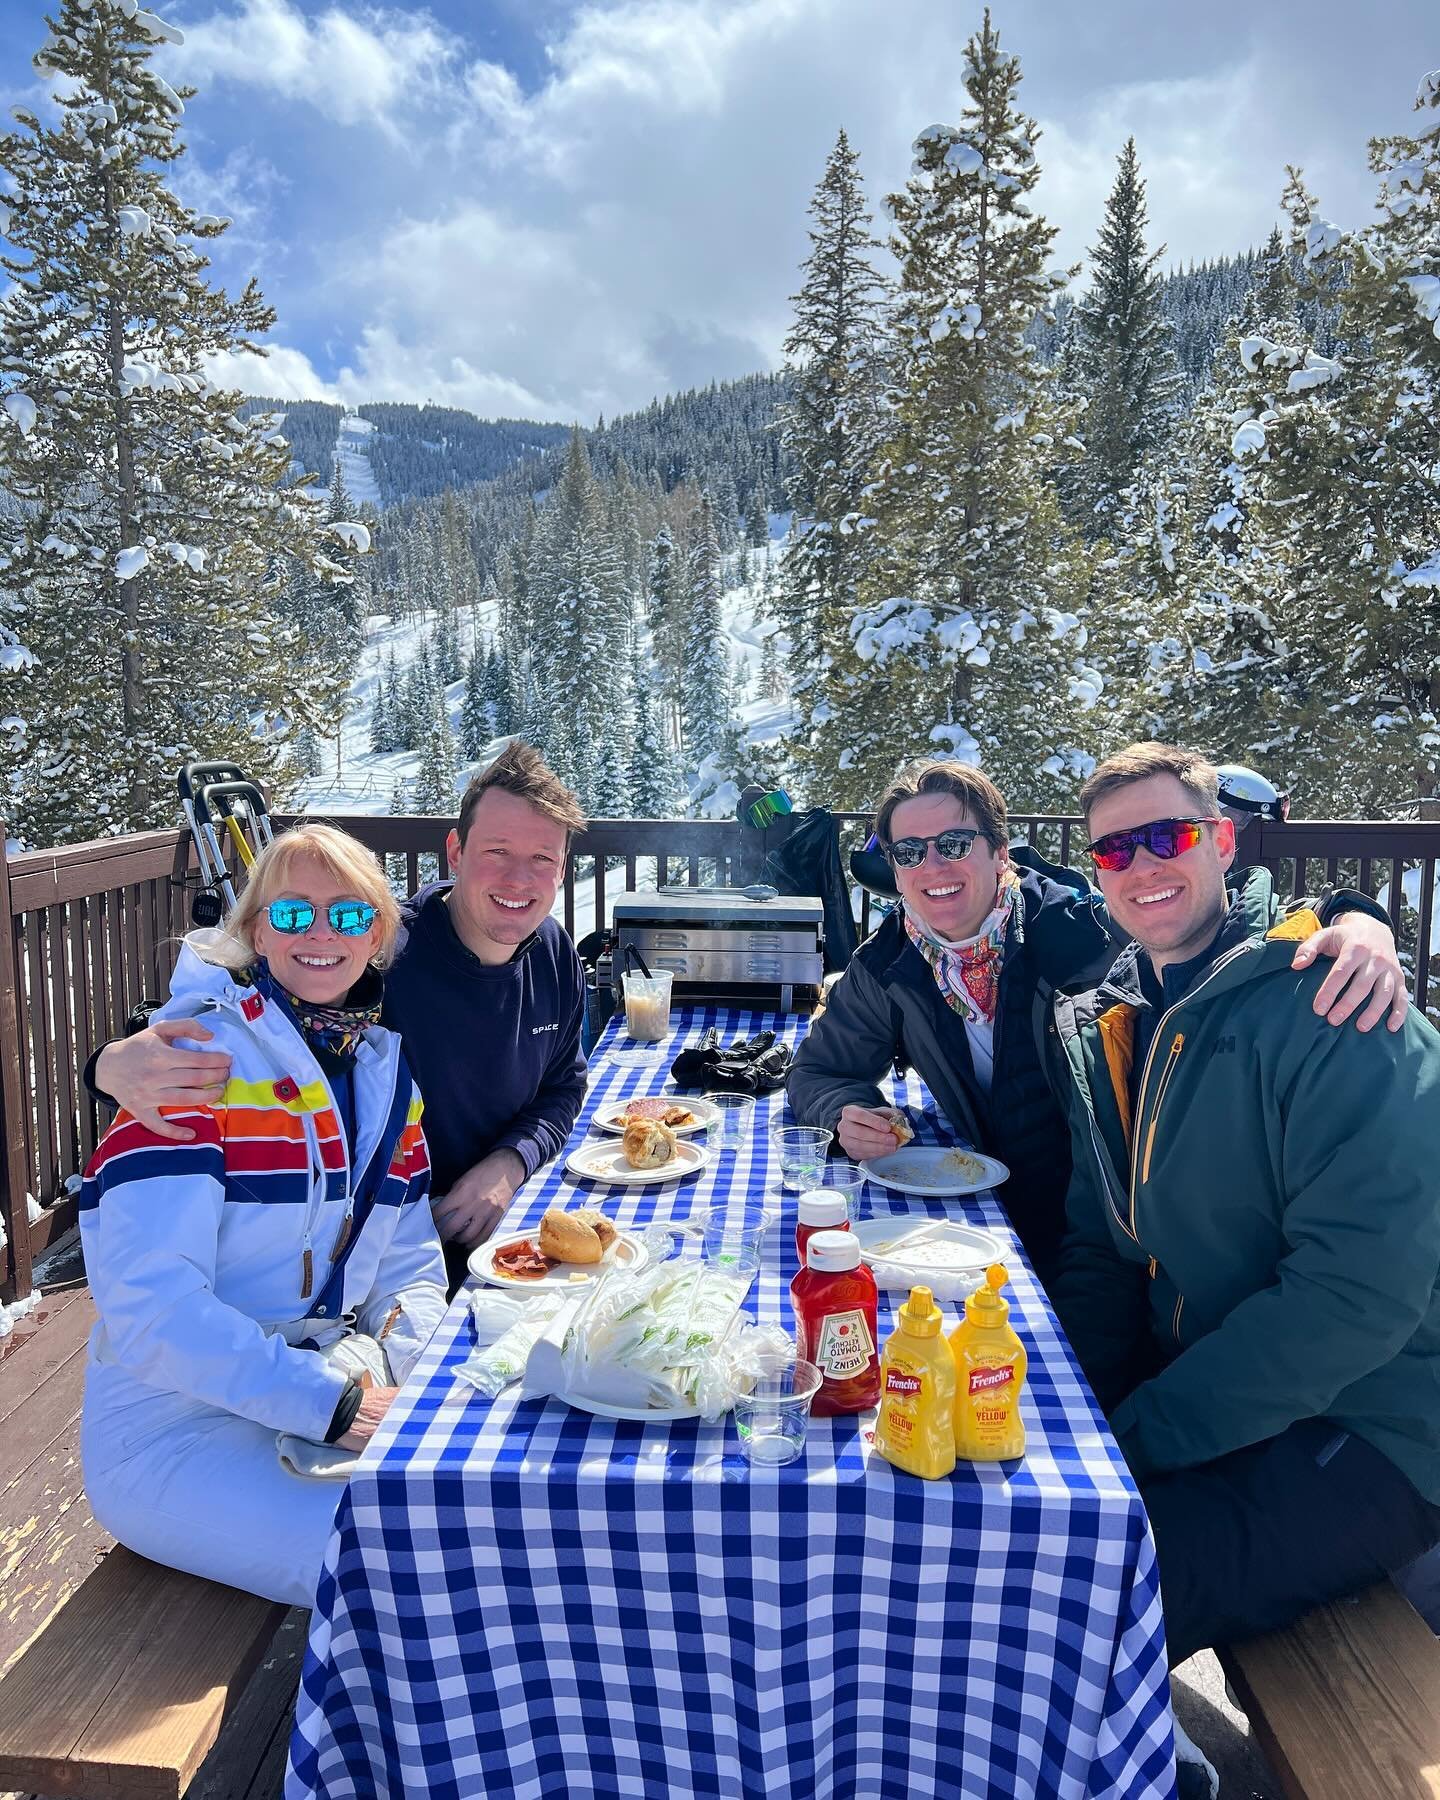 Snow, sun and #mythreesons + #family - 
It doesn&rsquo;t get any better!! ❄️🌞❄️🌞

A few lucky days out of the norm, a chance to be outdoors all day, clears and refreshes the mind and spirit.  Inspiration in nature is everywhere, in the abundance of